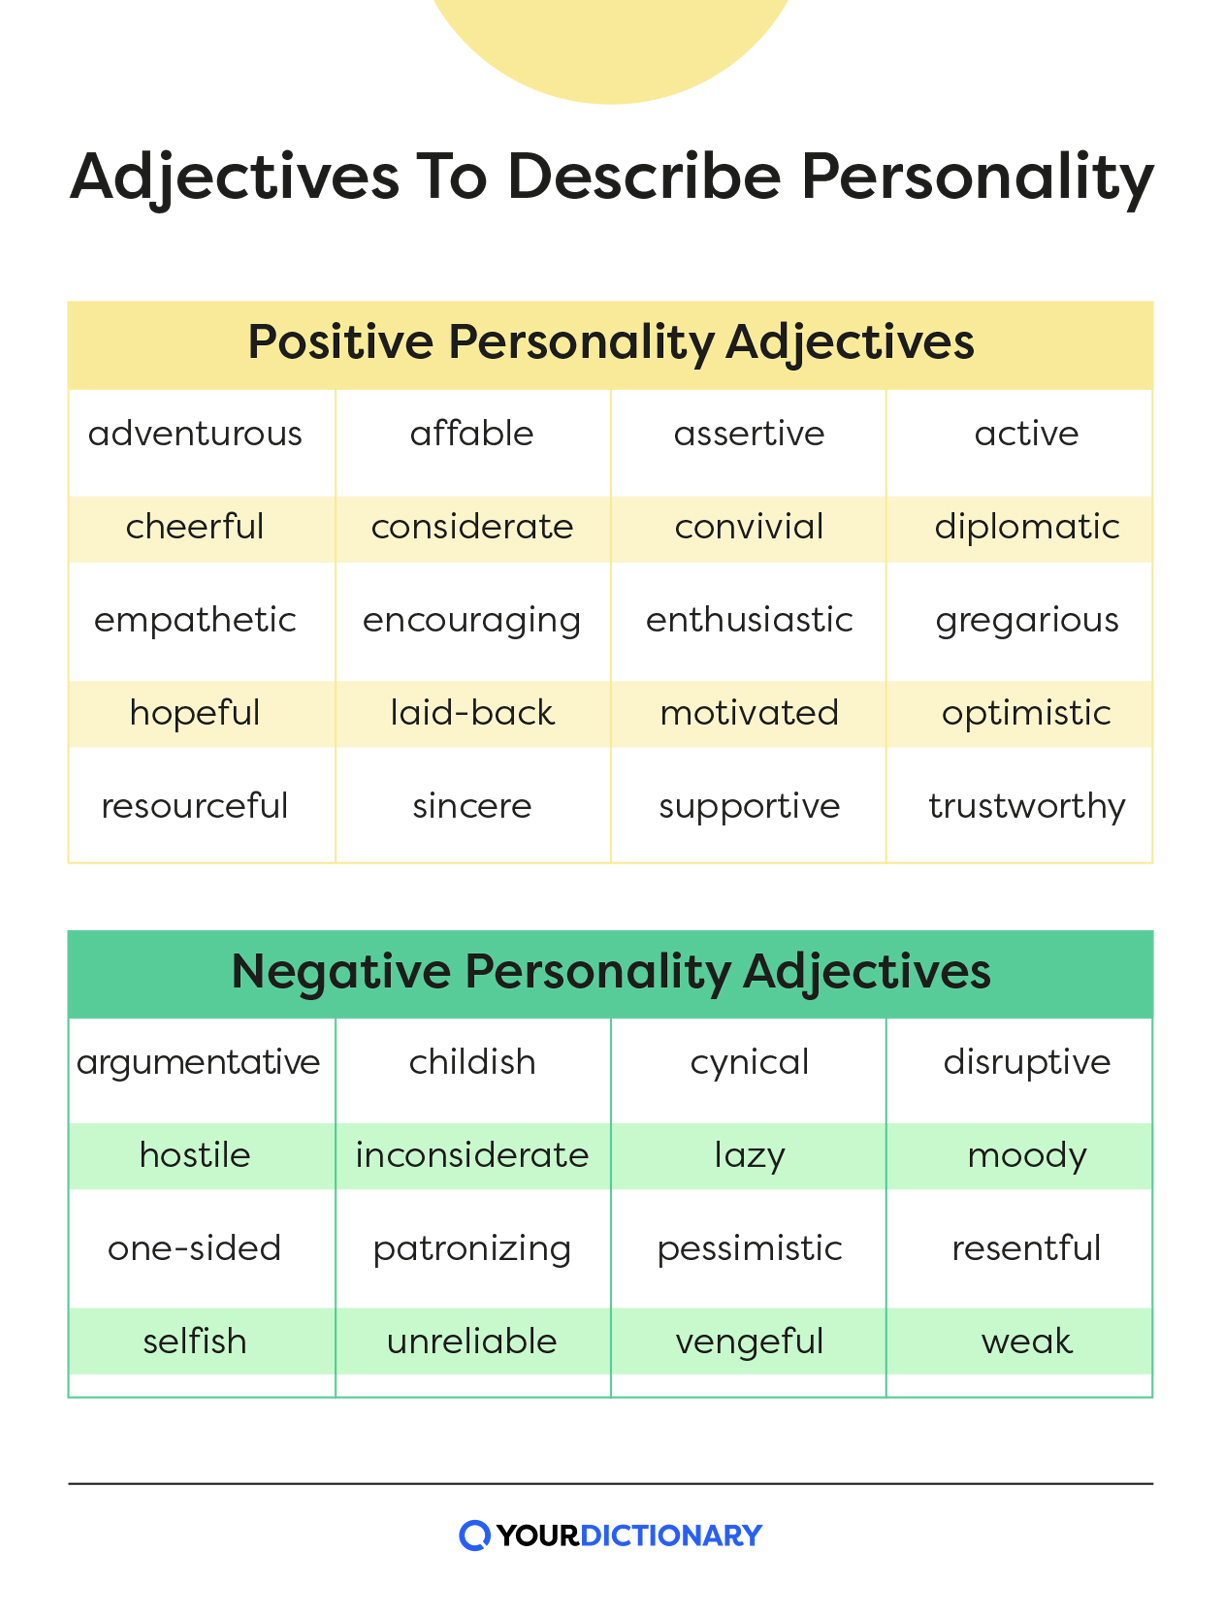 charts of positive and negative personality adjectives from the article